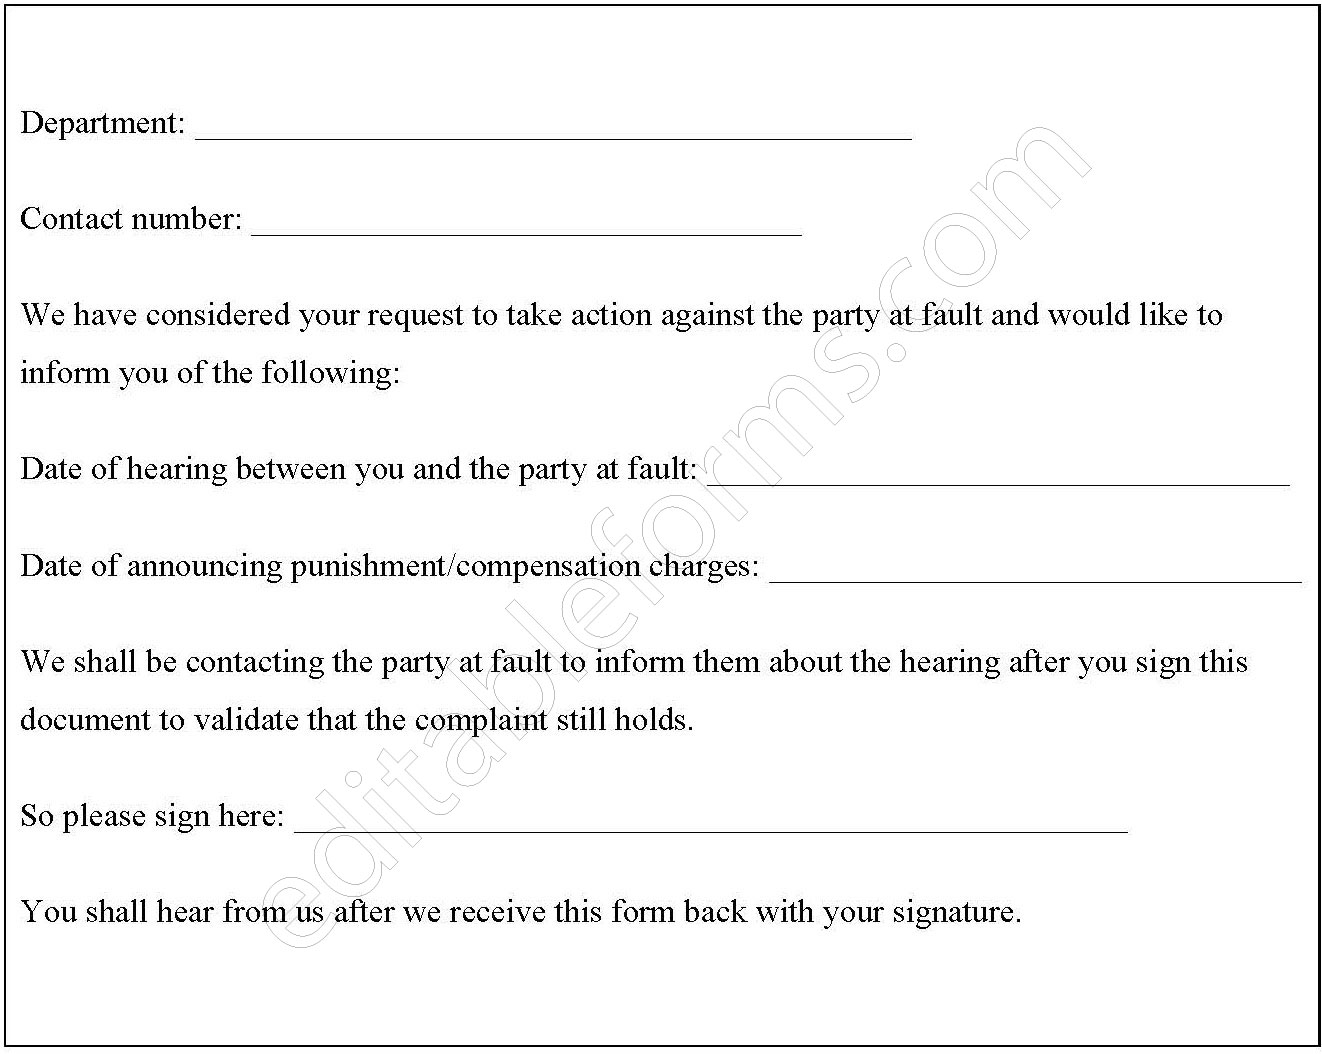 Responding to Complaint Form